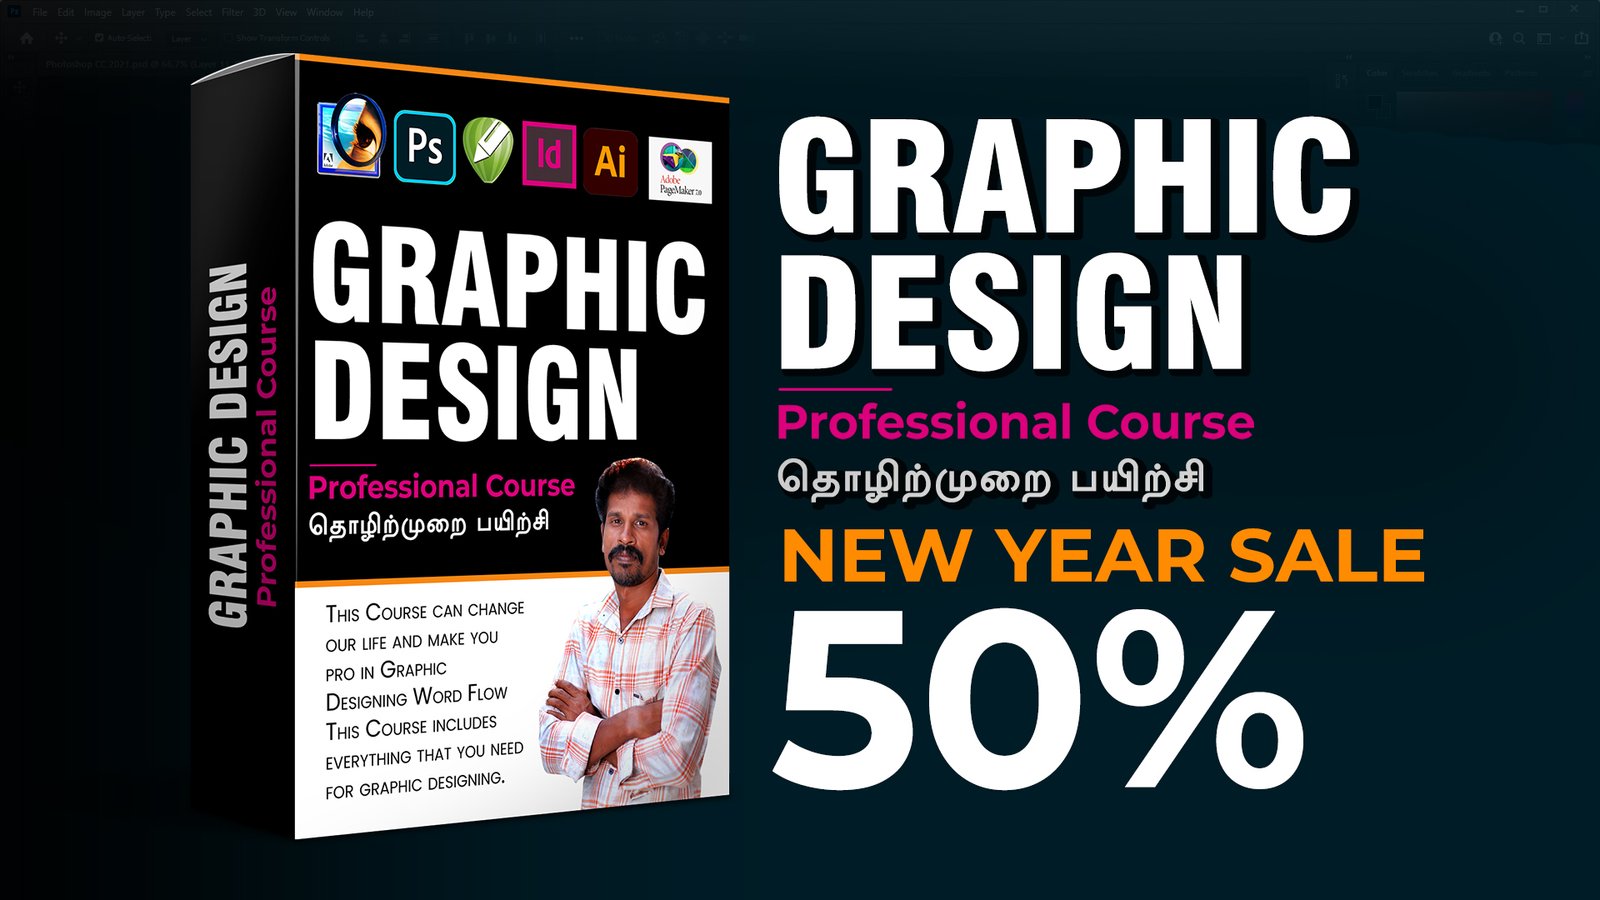 Professional Courses for Graphic Design